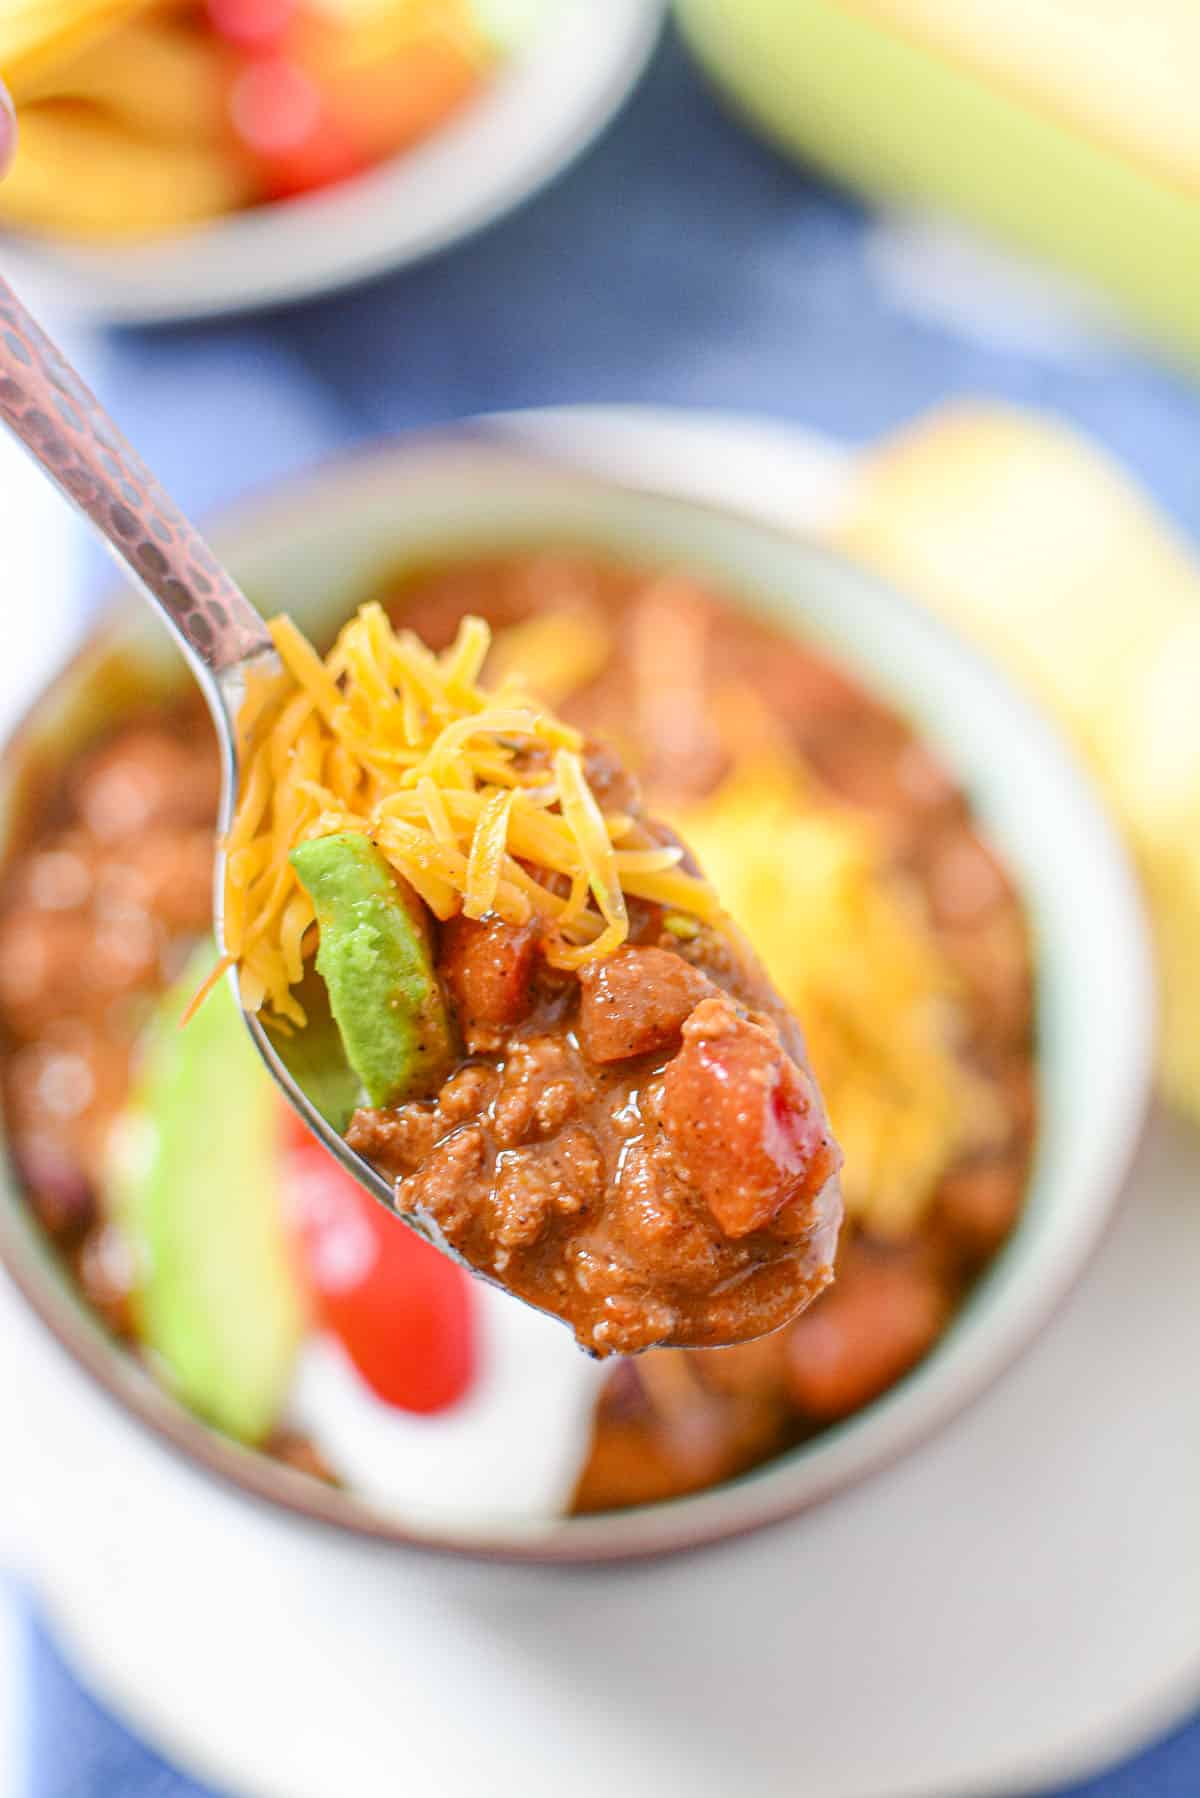 A mouthful of delicious chili on a spoon.